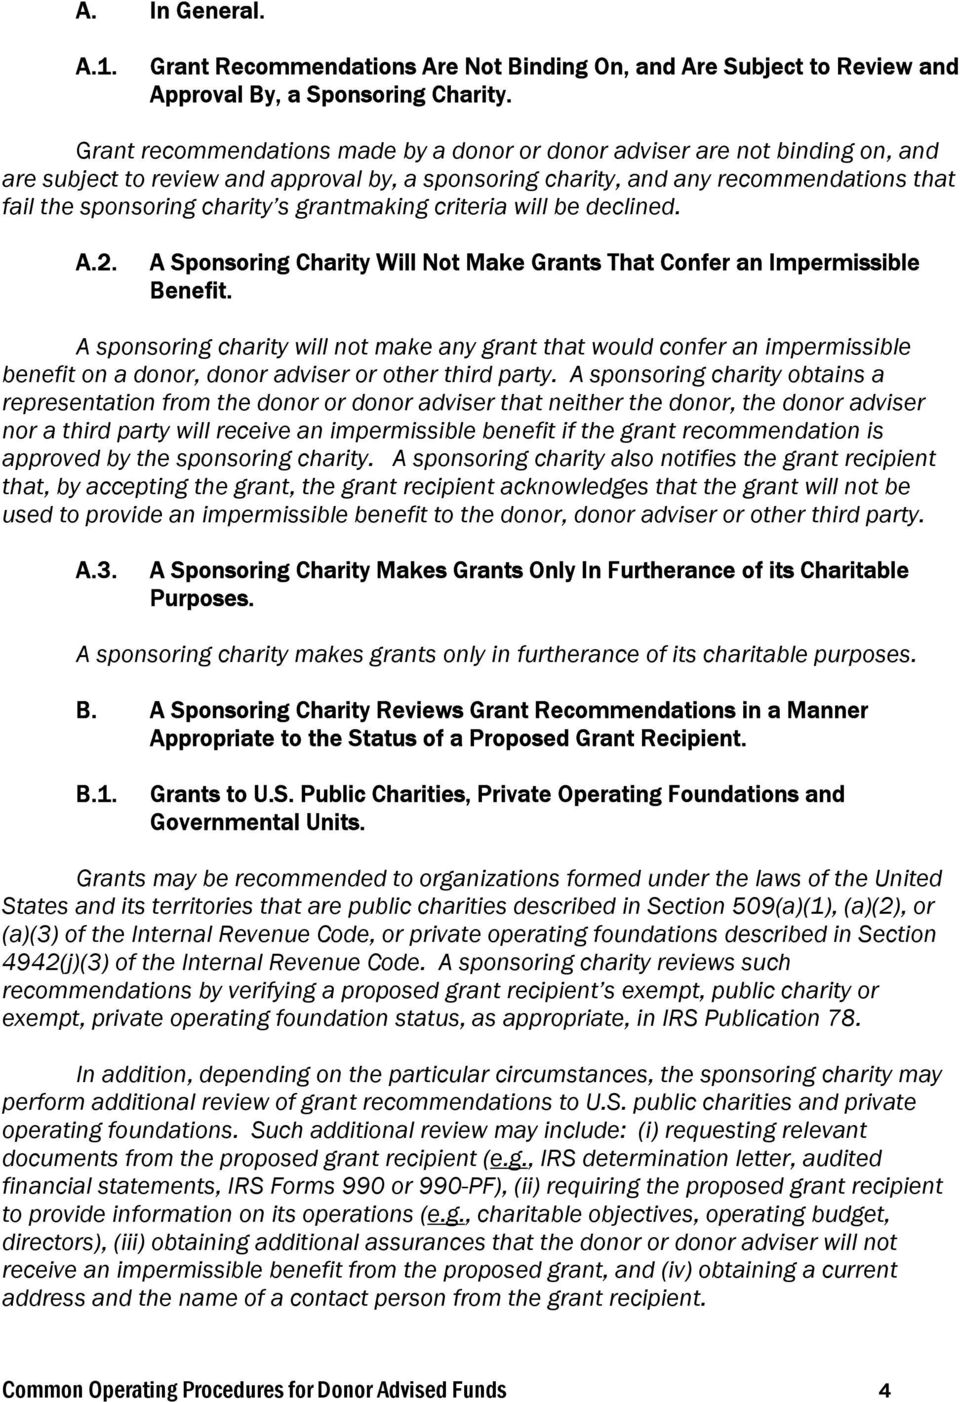 grantmaking criteria will be declined. A.2. A Sponsoring Charity Will Not Make Grants That Confer an Impermissible Benefit.